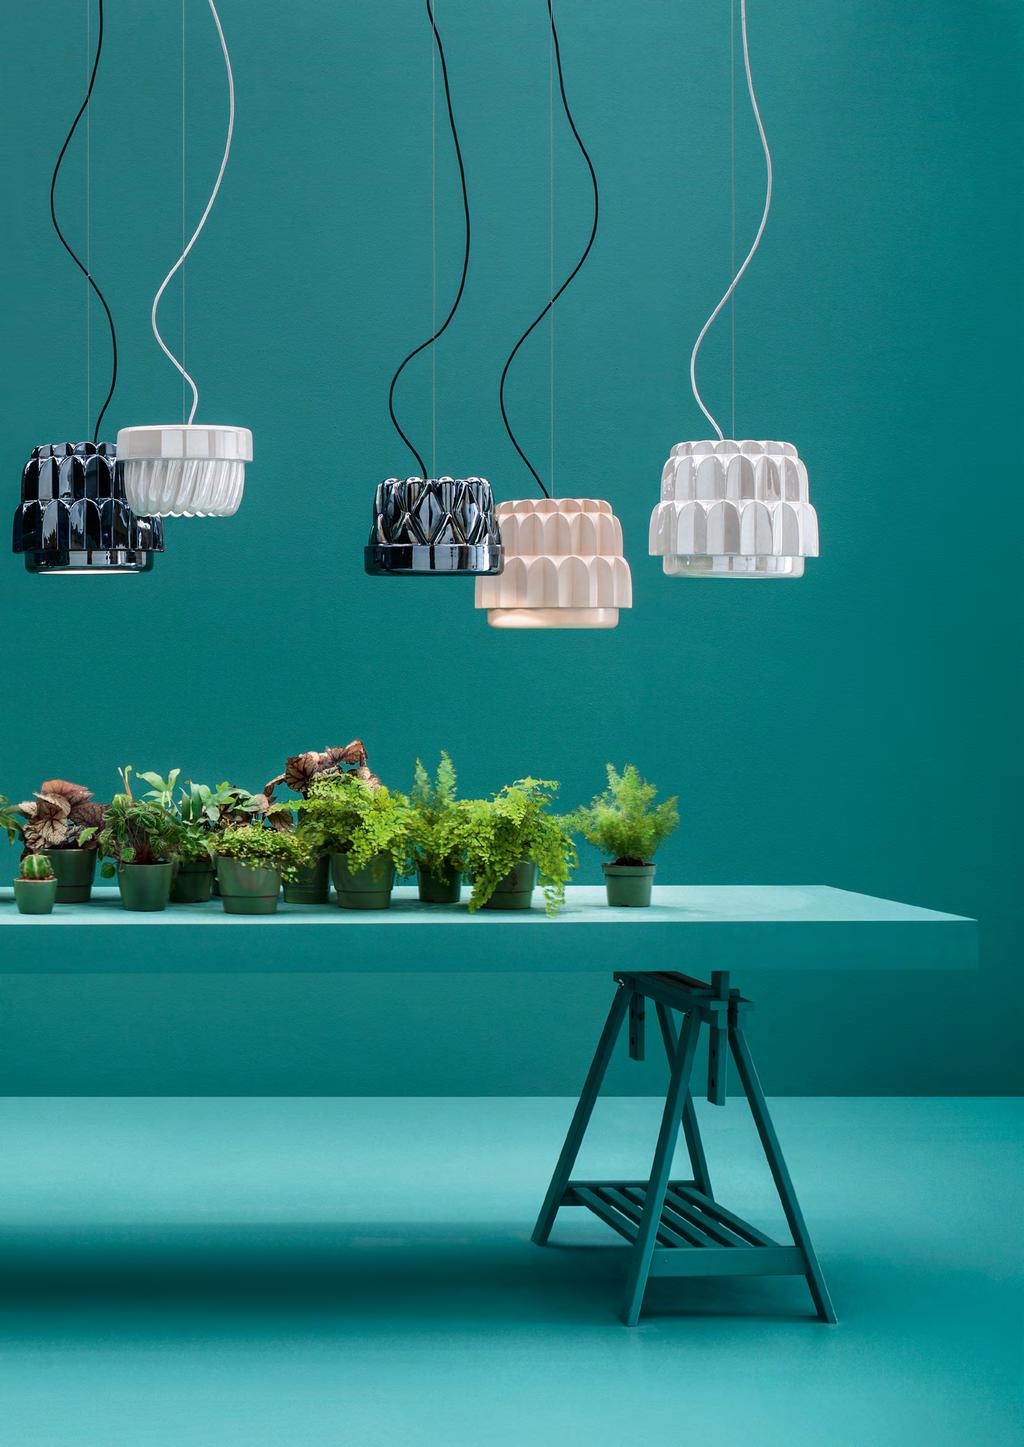 This collection of suspension lamps is inspired by an ideal banquet where the stars are the Savarin puddings, created using the unmistakable moulds, a perfect example of